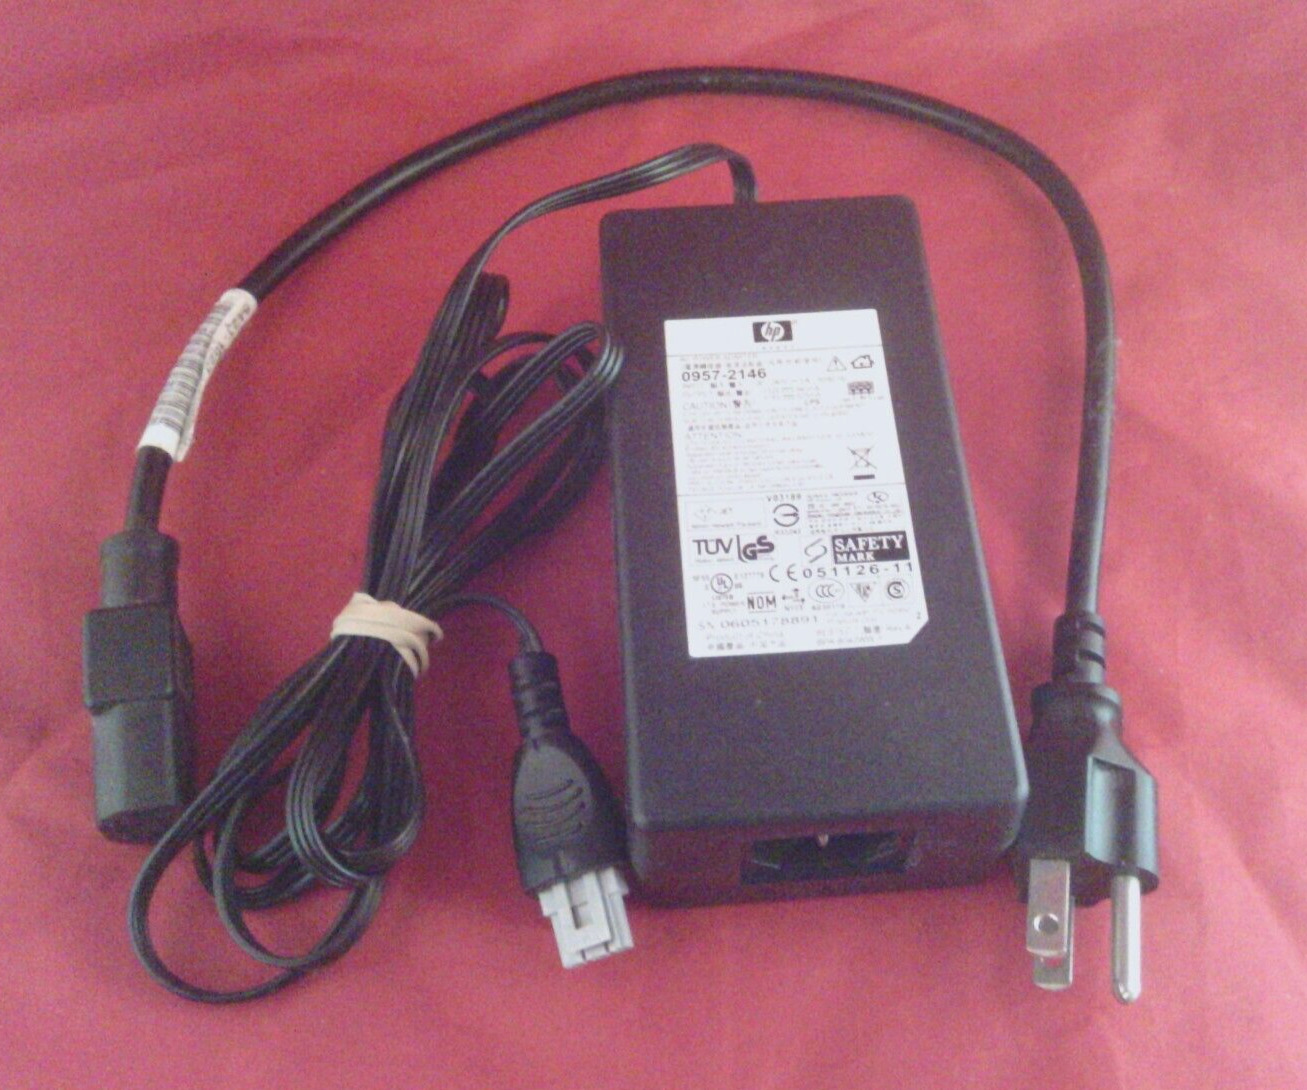 Genuine HP 0957-2146 Printer power supply ac adapter w/cord cable charger Tested